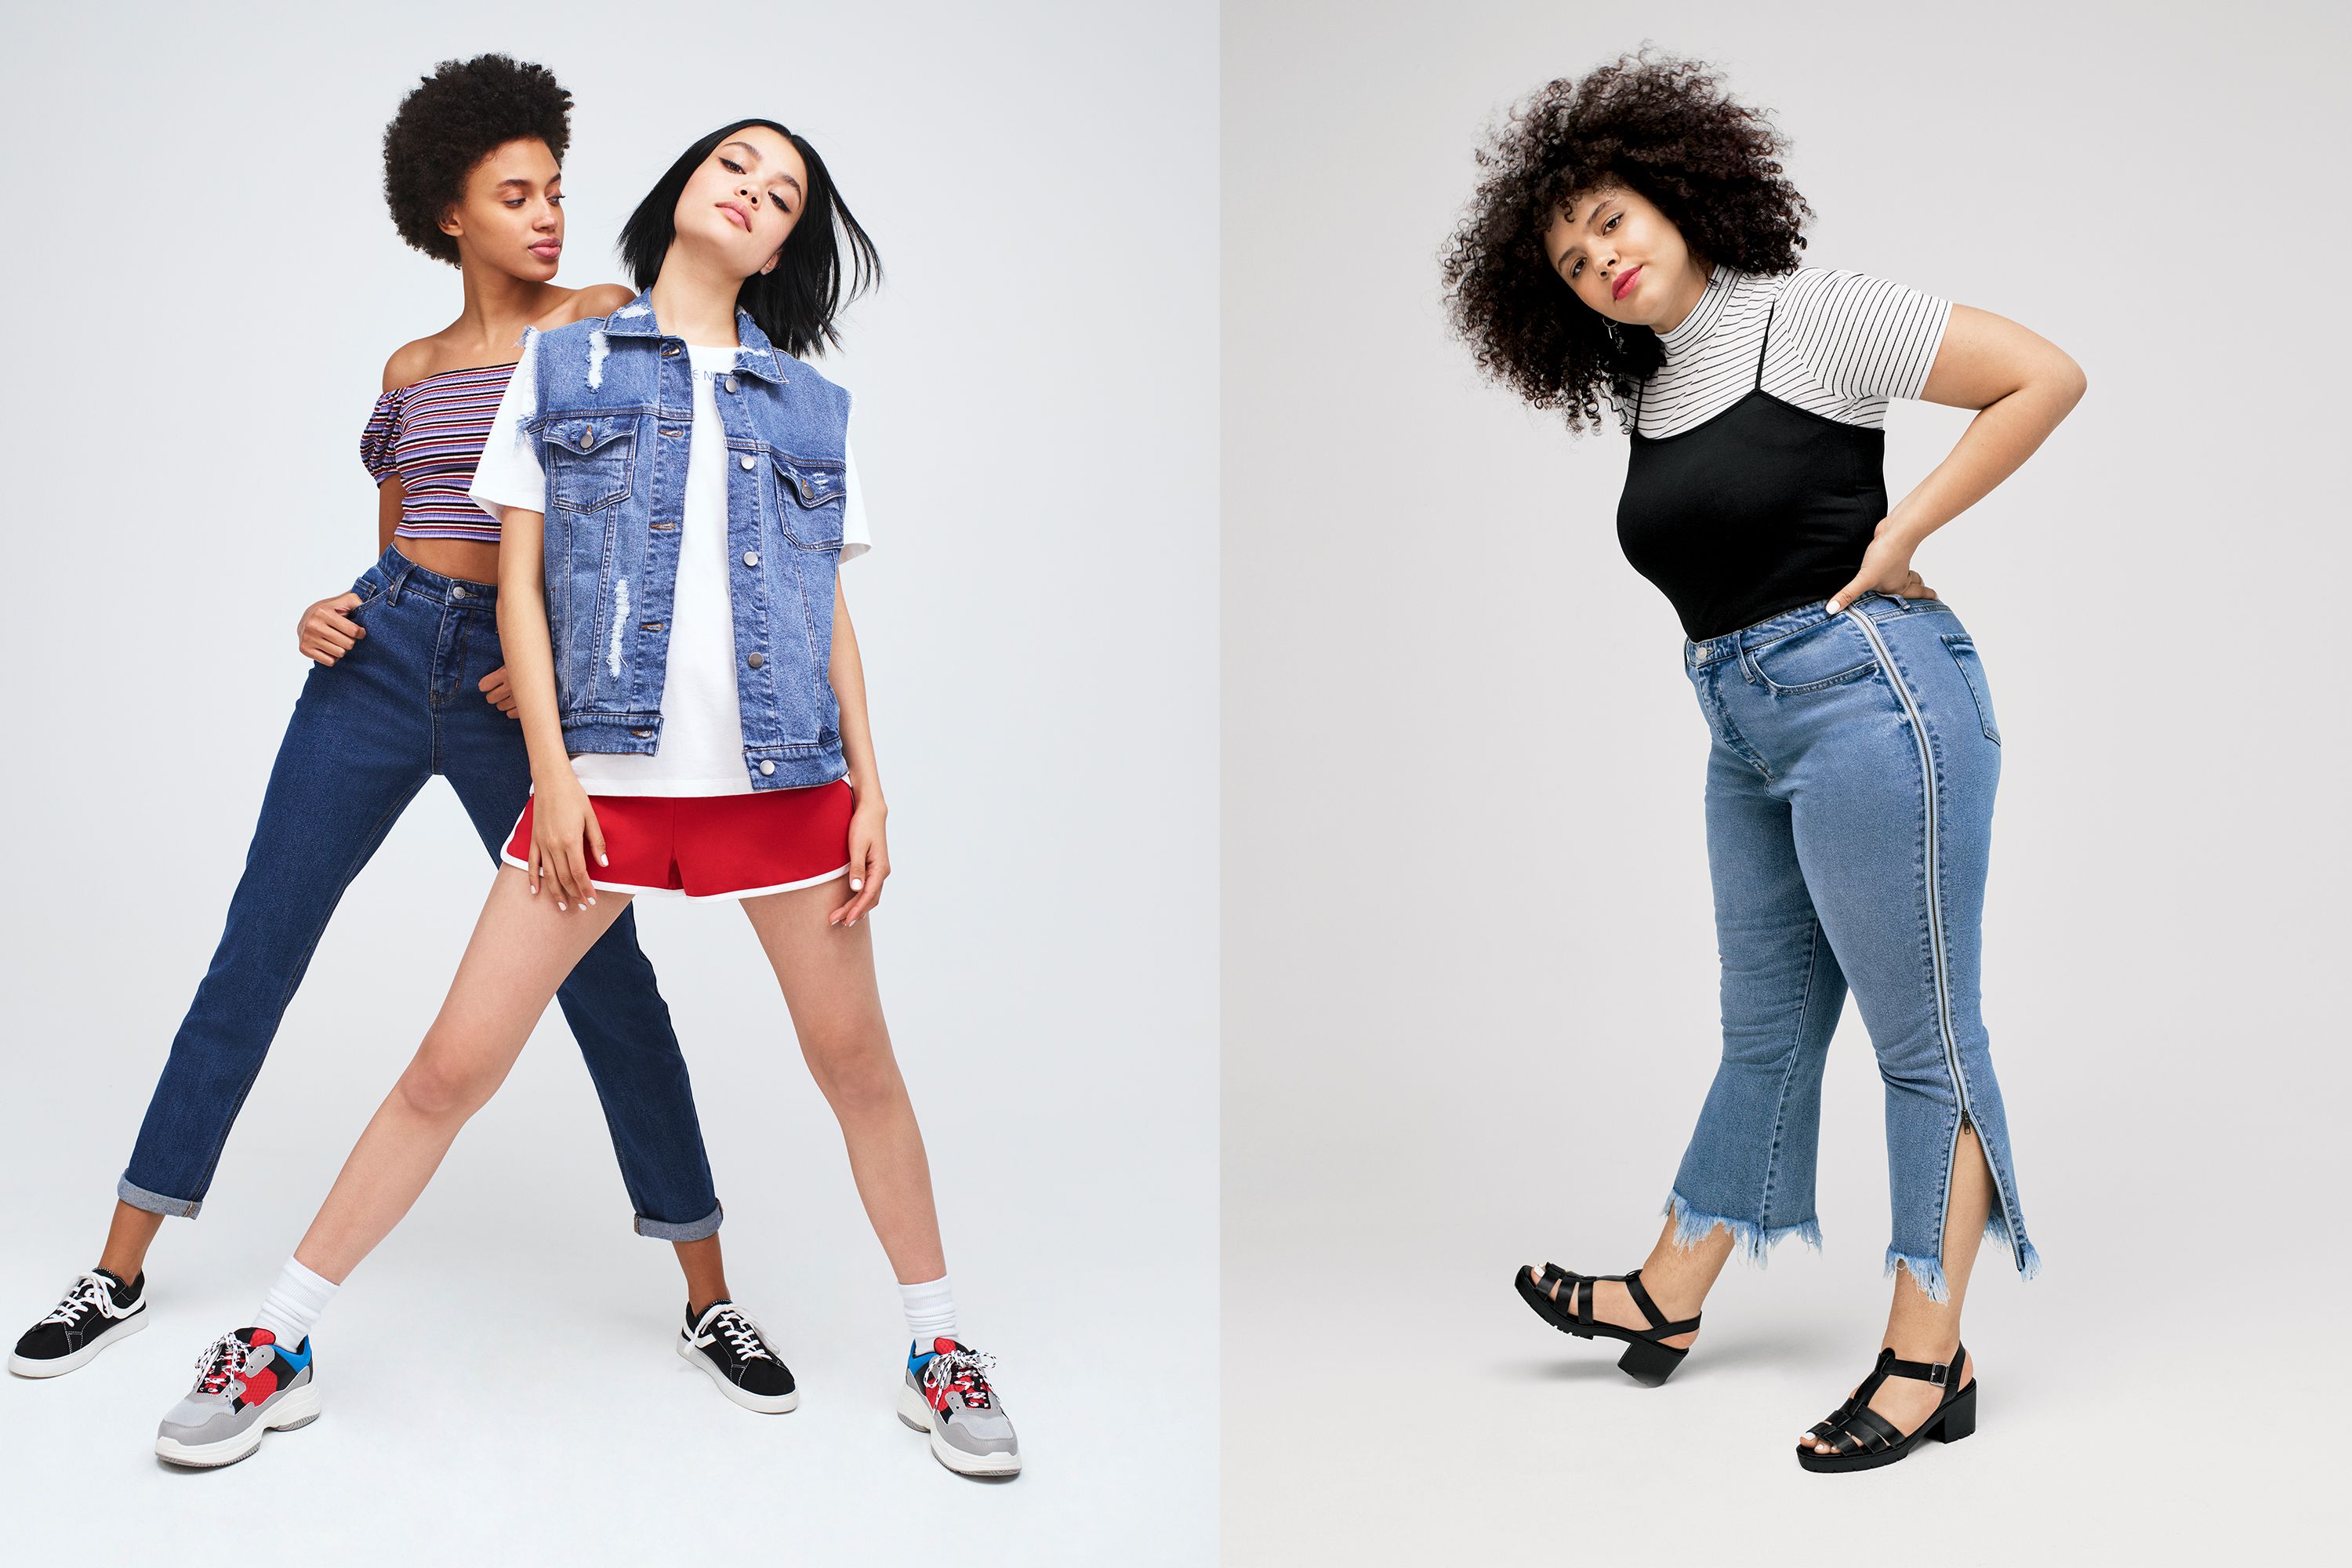 Target Debuts Two New Labels, Wild Fable and Original Use - Target